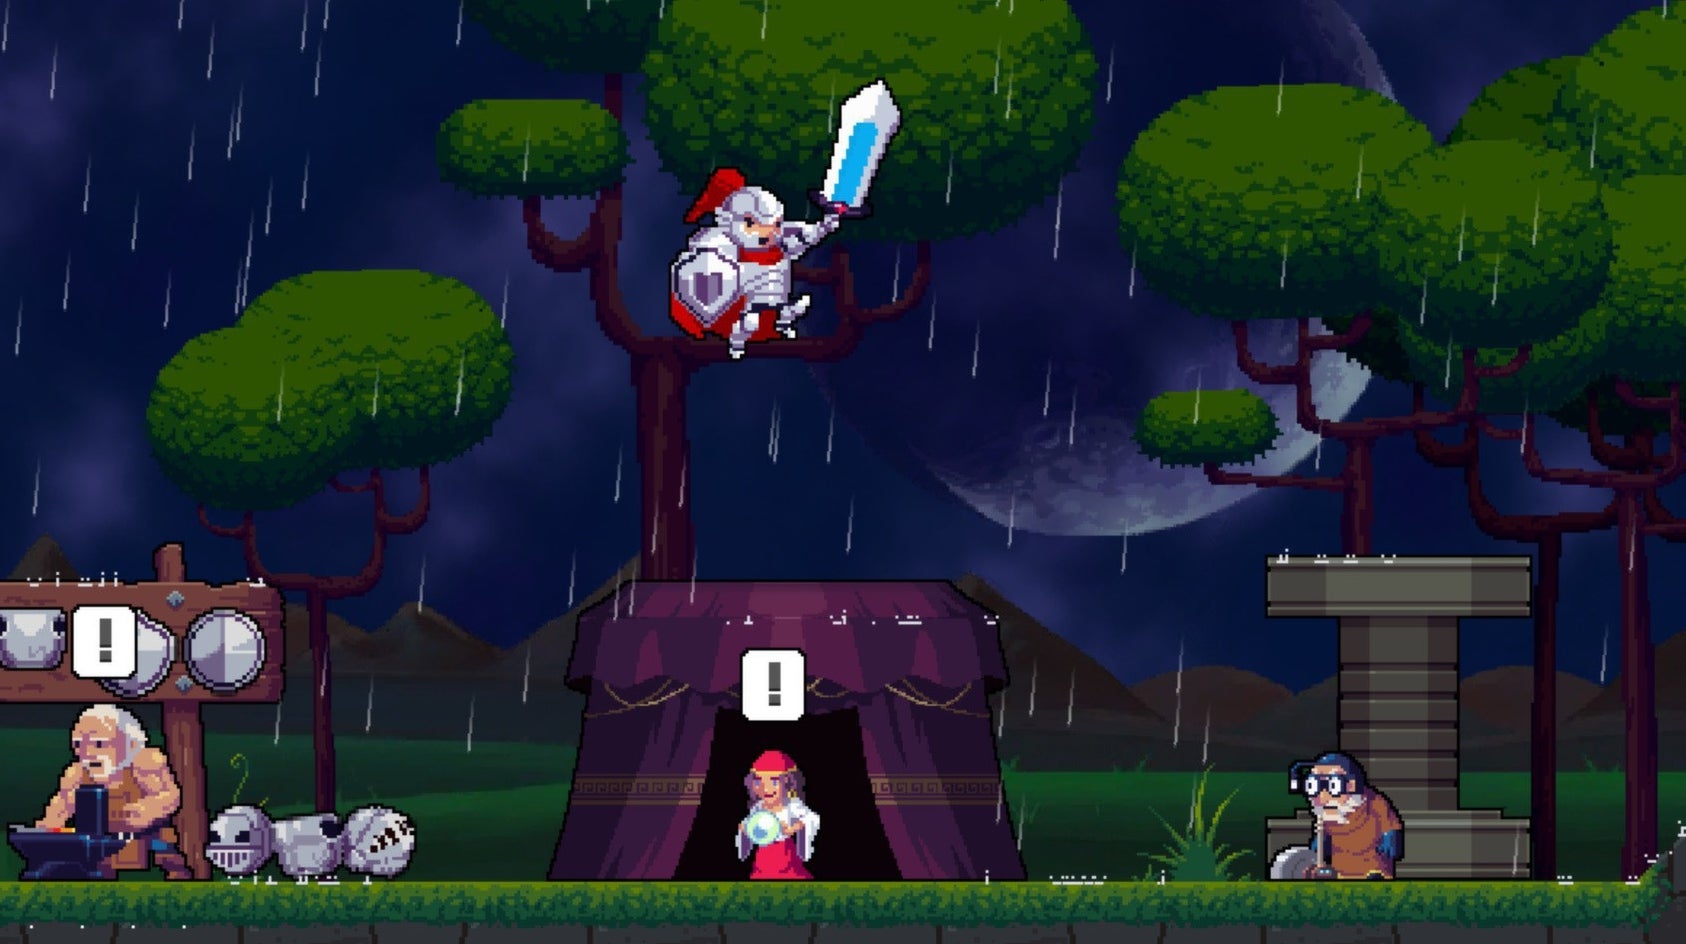 Image for Brilliant genealogical platformer Rogue Legacy launches on Switch next month